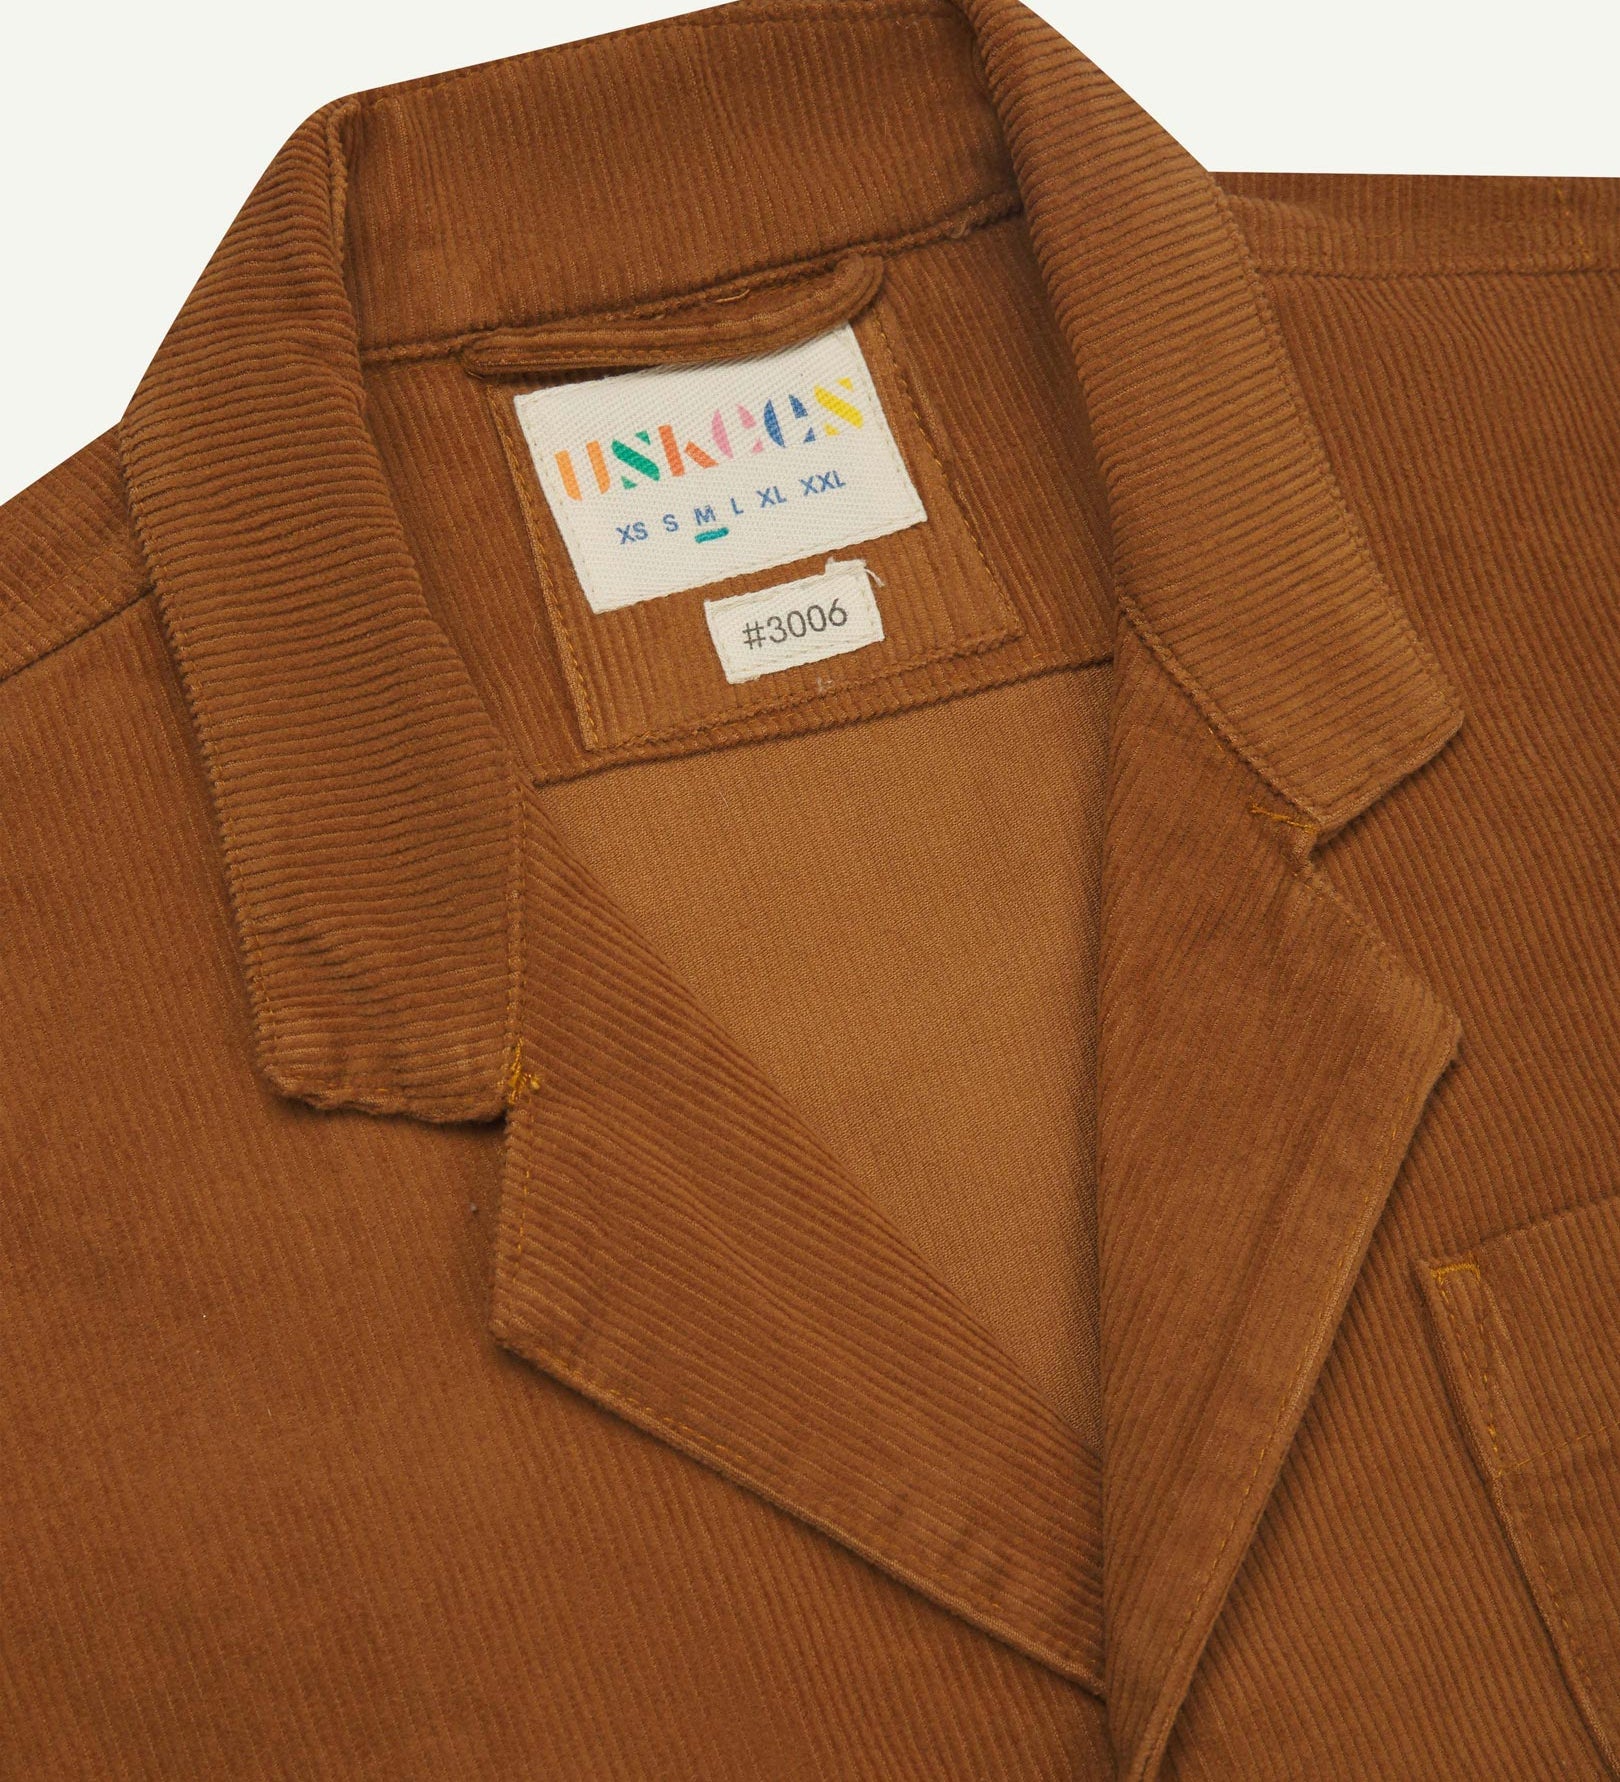 Close-up front view of organic cord tan blazer showing the collar, lapels and Uskees brand label.